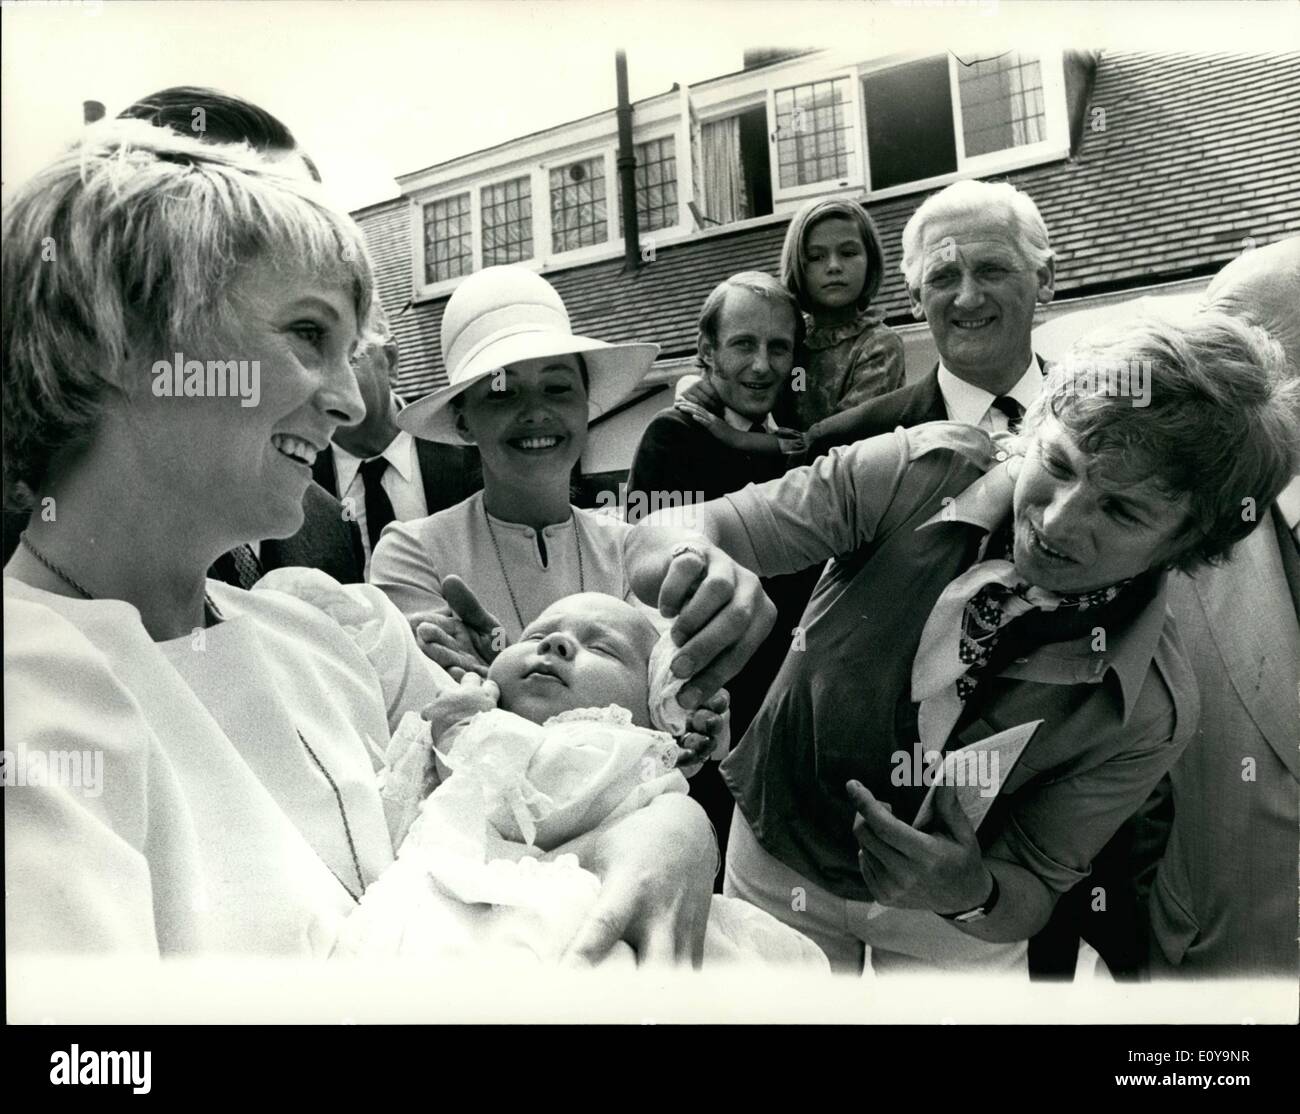 Jun. 06, 1969 - Tommy Steele's Daughter Christened Tommy Steele's daughter, Emma Elizabeth, was christened today at a private ceremony in the garden of their home, Teddington. The ceremony was performed by Father John Bebb, who officiated at Today's wedding. Photo Shows: Tommy wipes his daughter's head with cotton wool after the christening ceremony. Emma Elizabeth is held in the arms of his godmother, Polly James, who appeared with Tommy in ''Half a sixpence'' in New York. Stock Photo